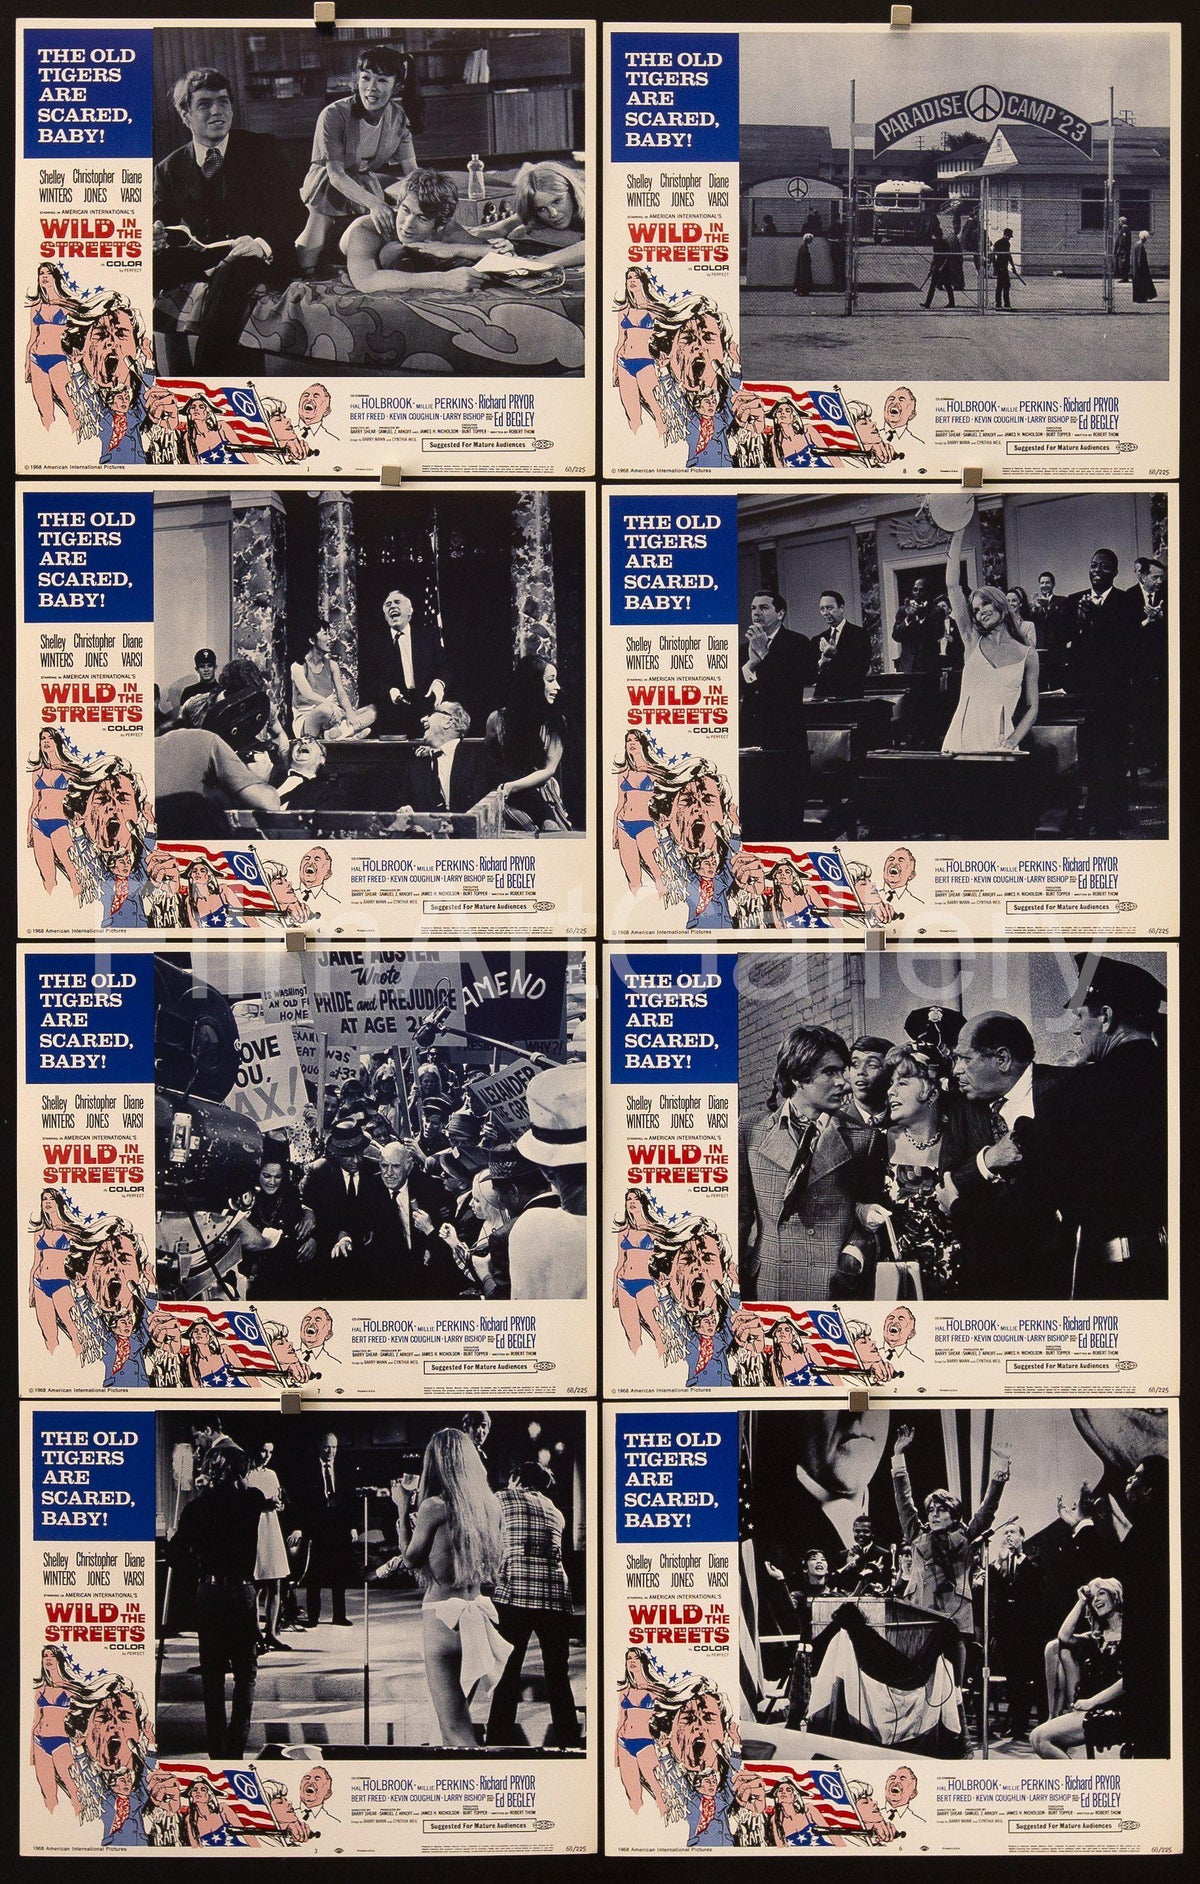 Wild in the Streets Lobby Card Set (8-11x14) Original Vintage Movie Poster